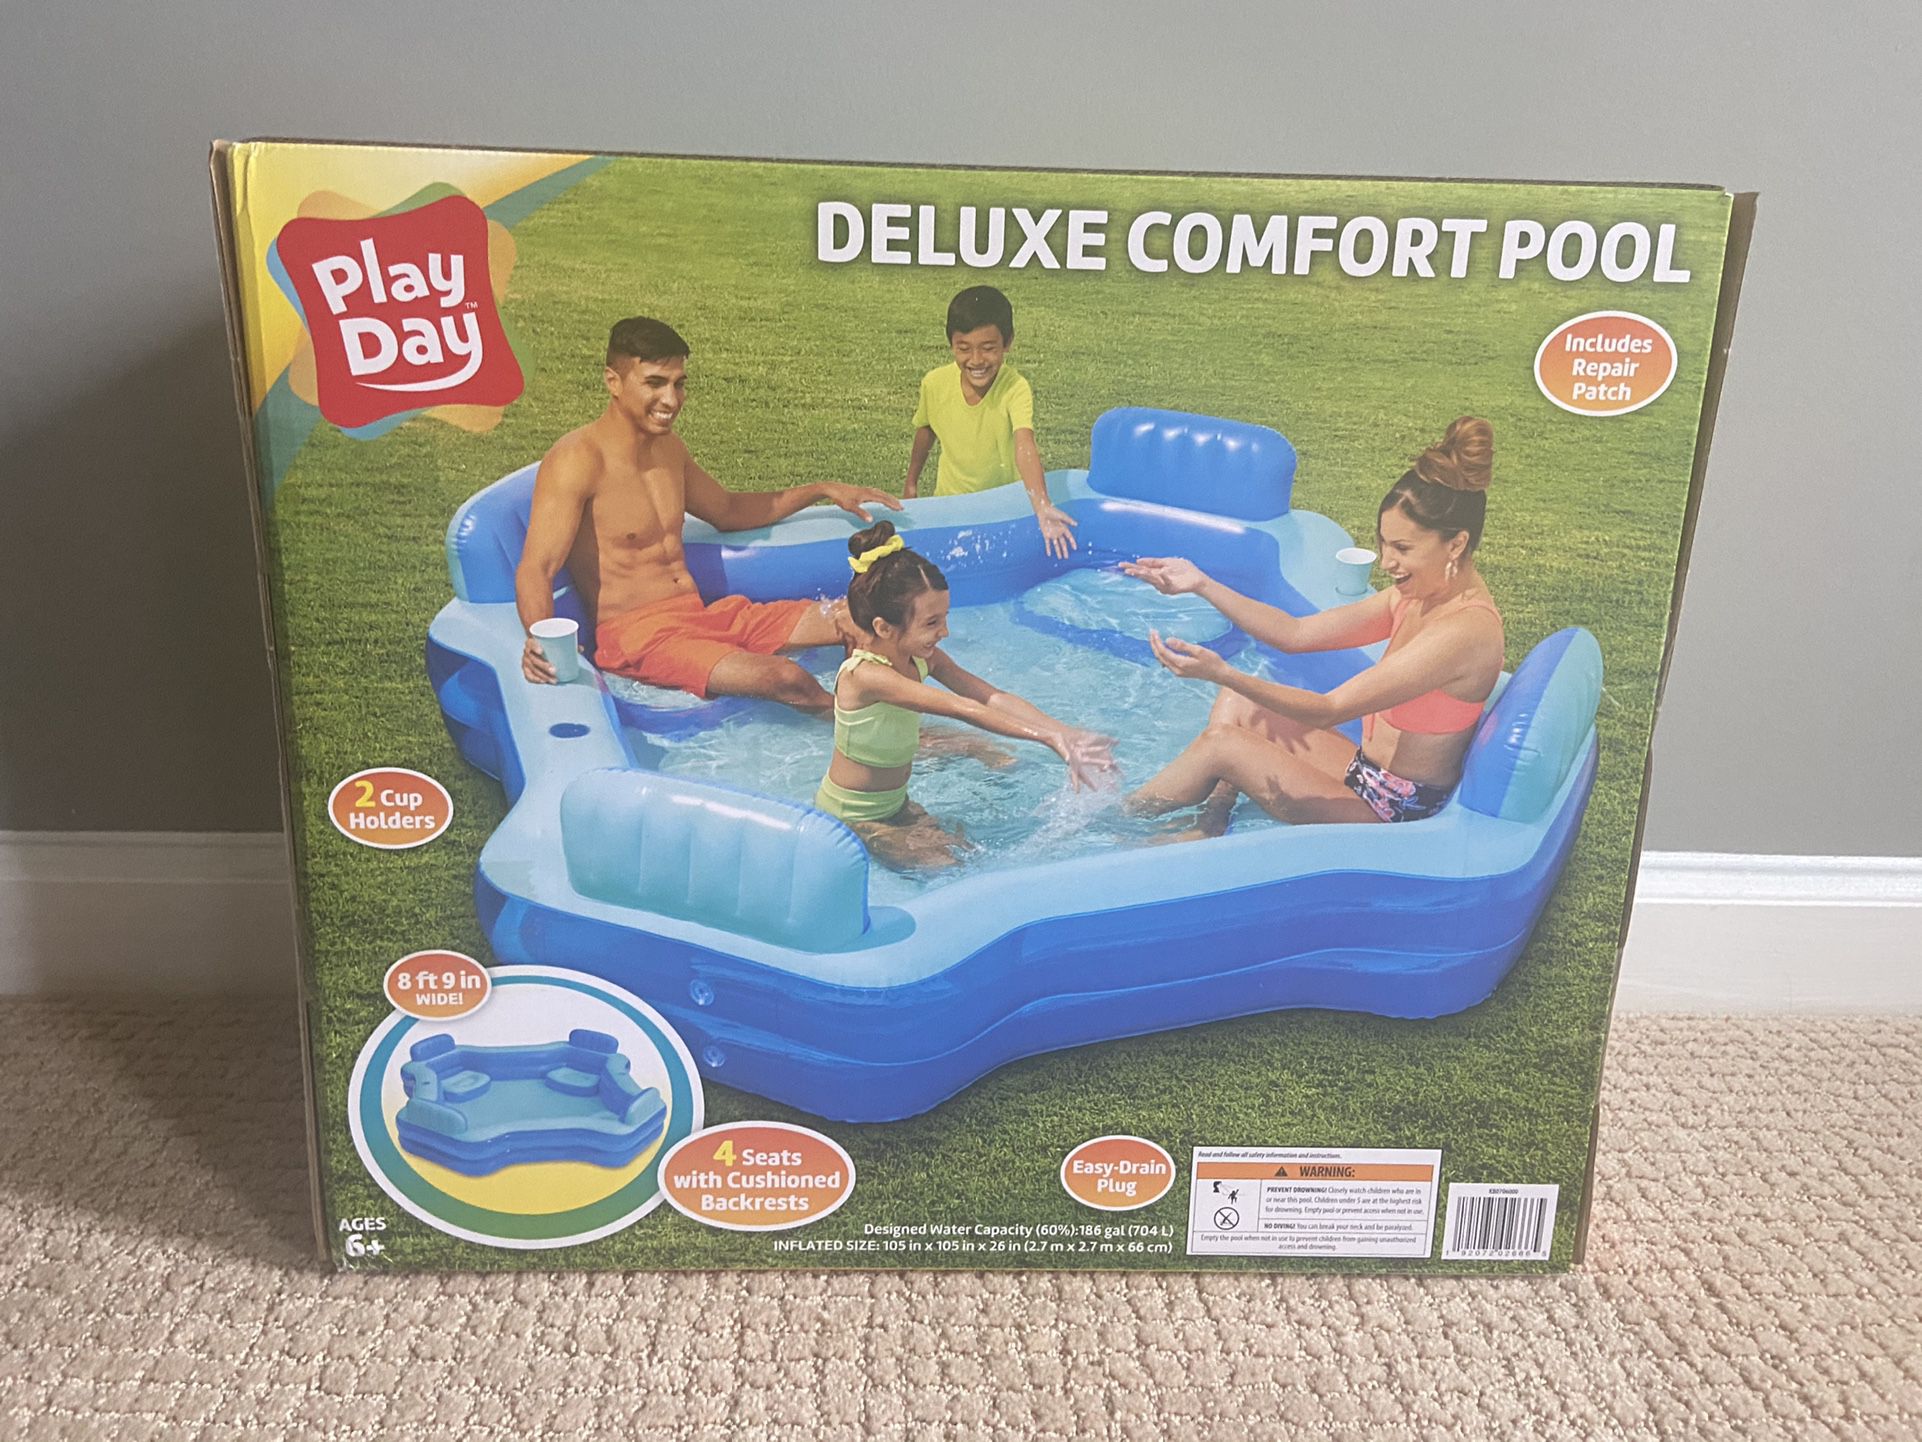 Play Day Deluxe Comfort Pool - Brand New